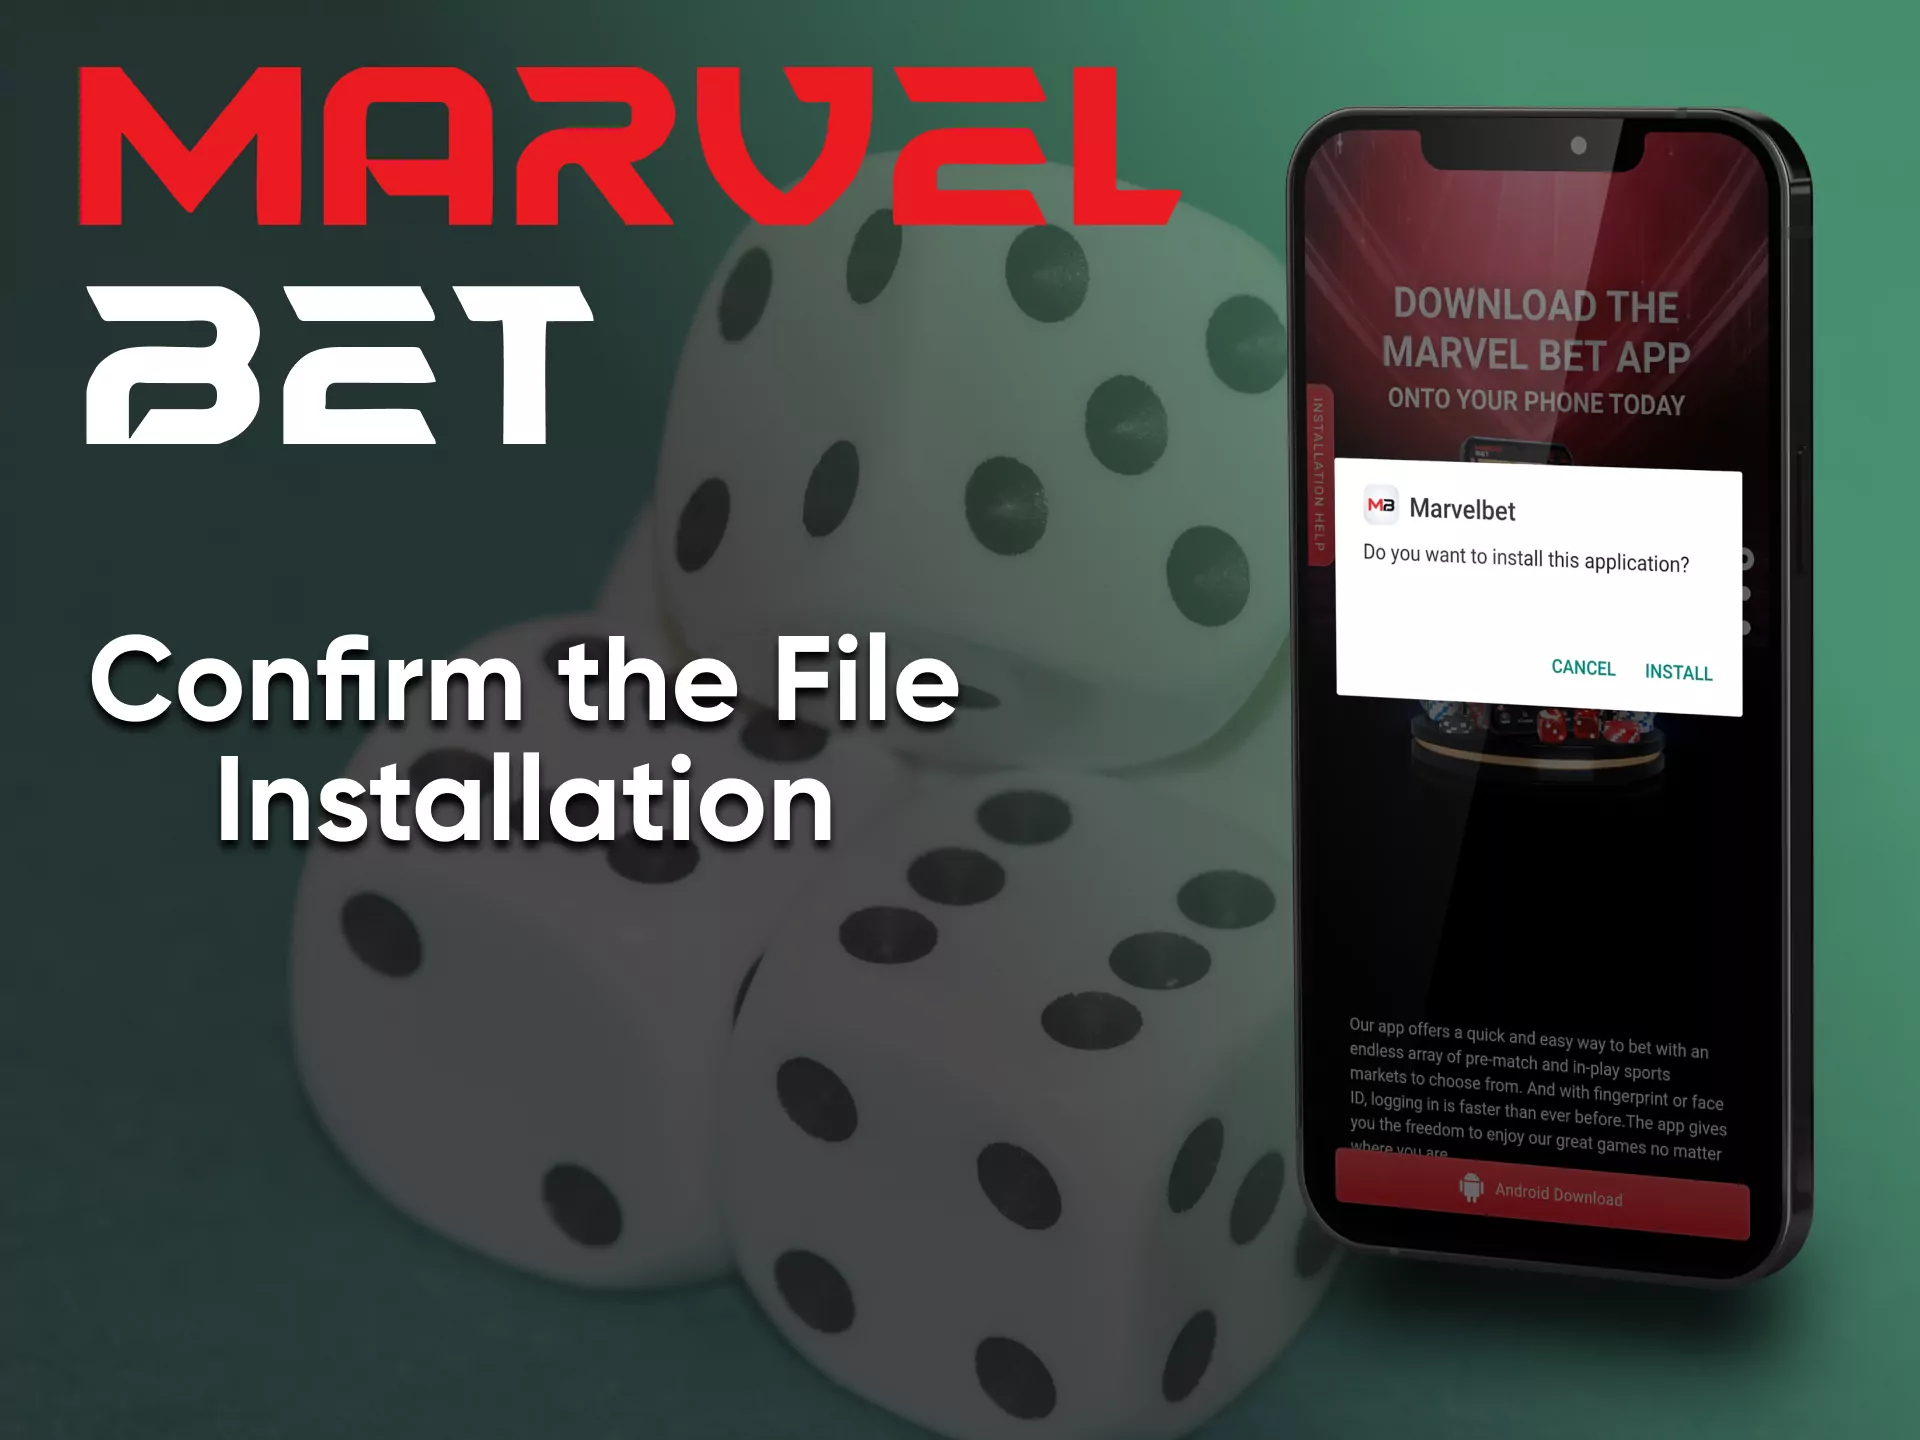 Finish installing the application for casino games from Marvelbet.